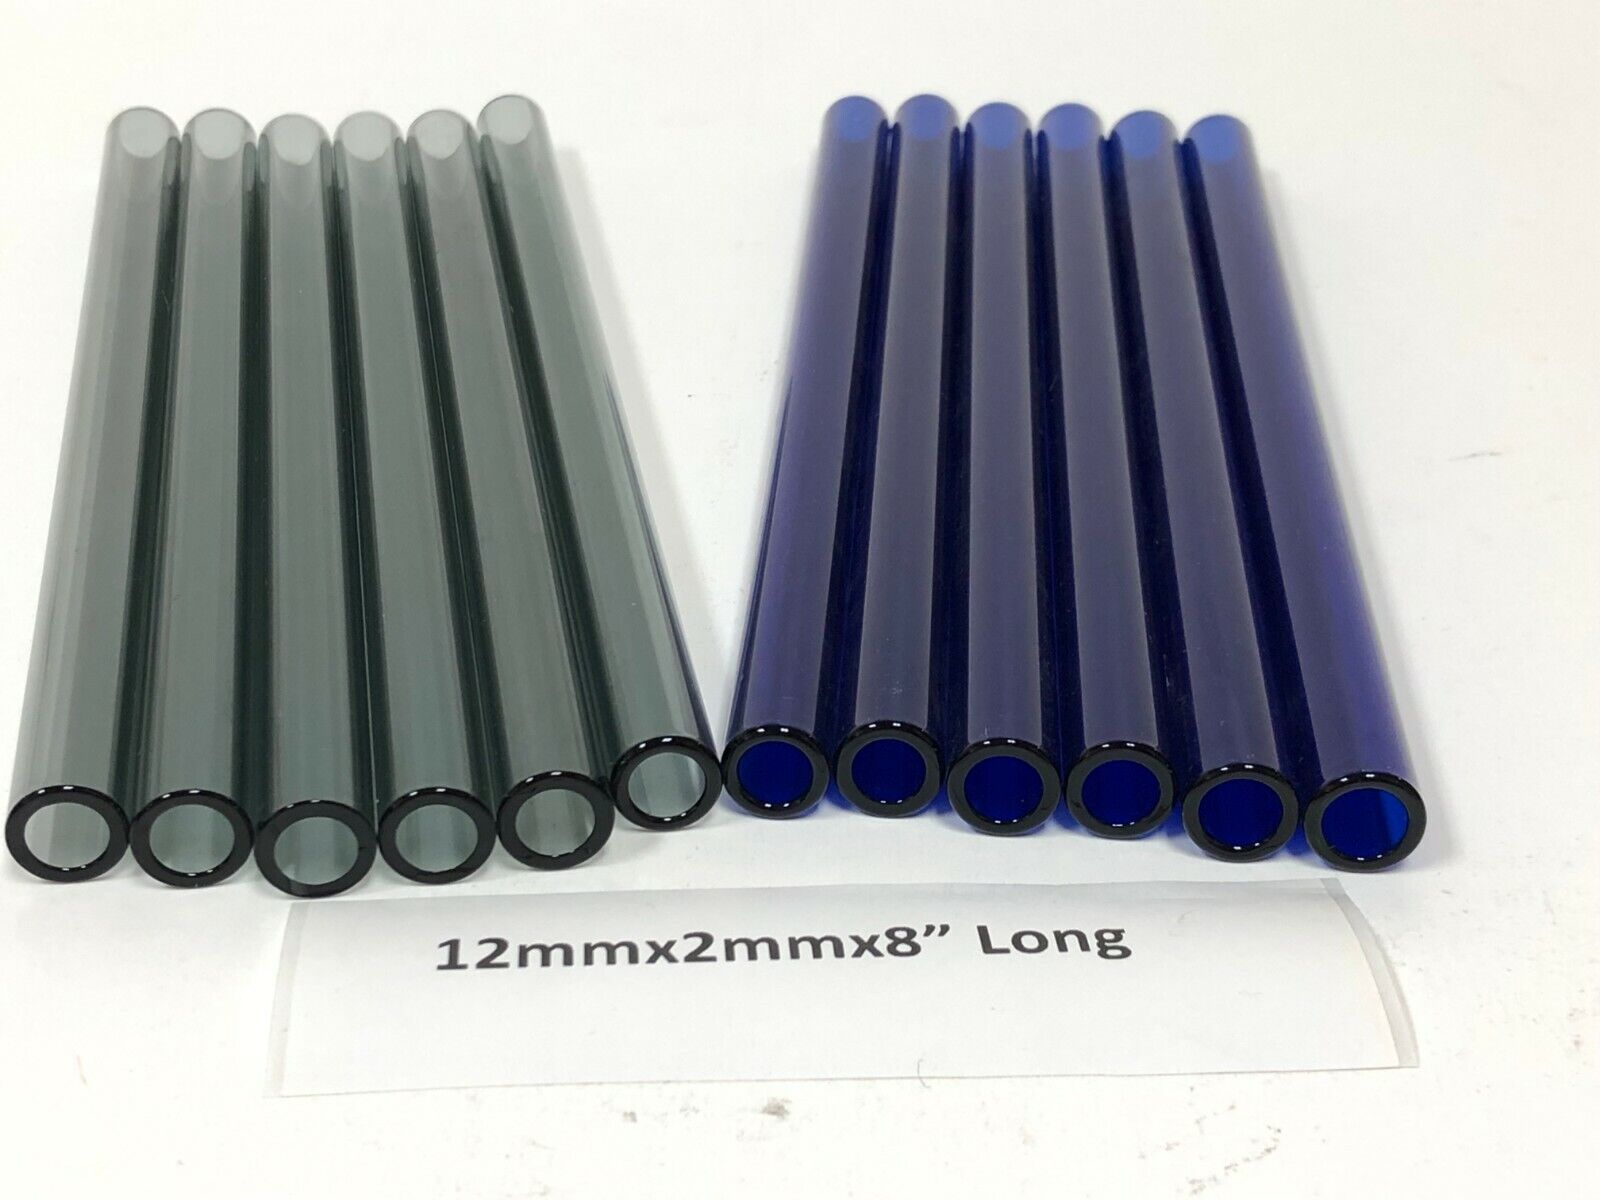 08 Pieces Glass tube Pyrex 12 mm X 2 mm X 12" Long   Blowing tube  ID=8mm  Color Pyrex Does Not Apply - фотография #10